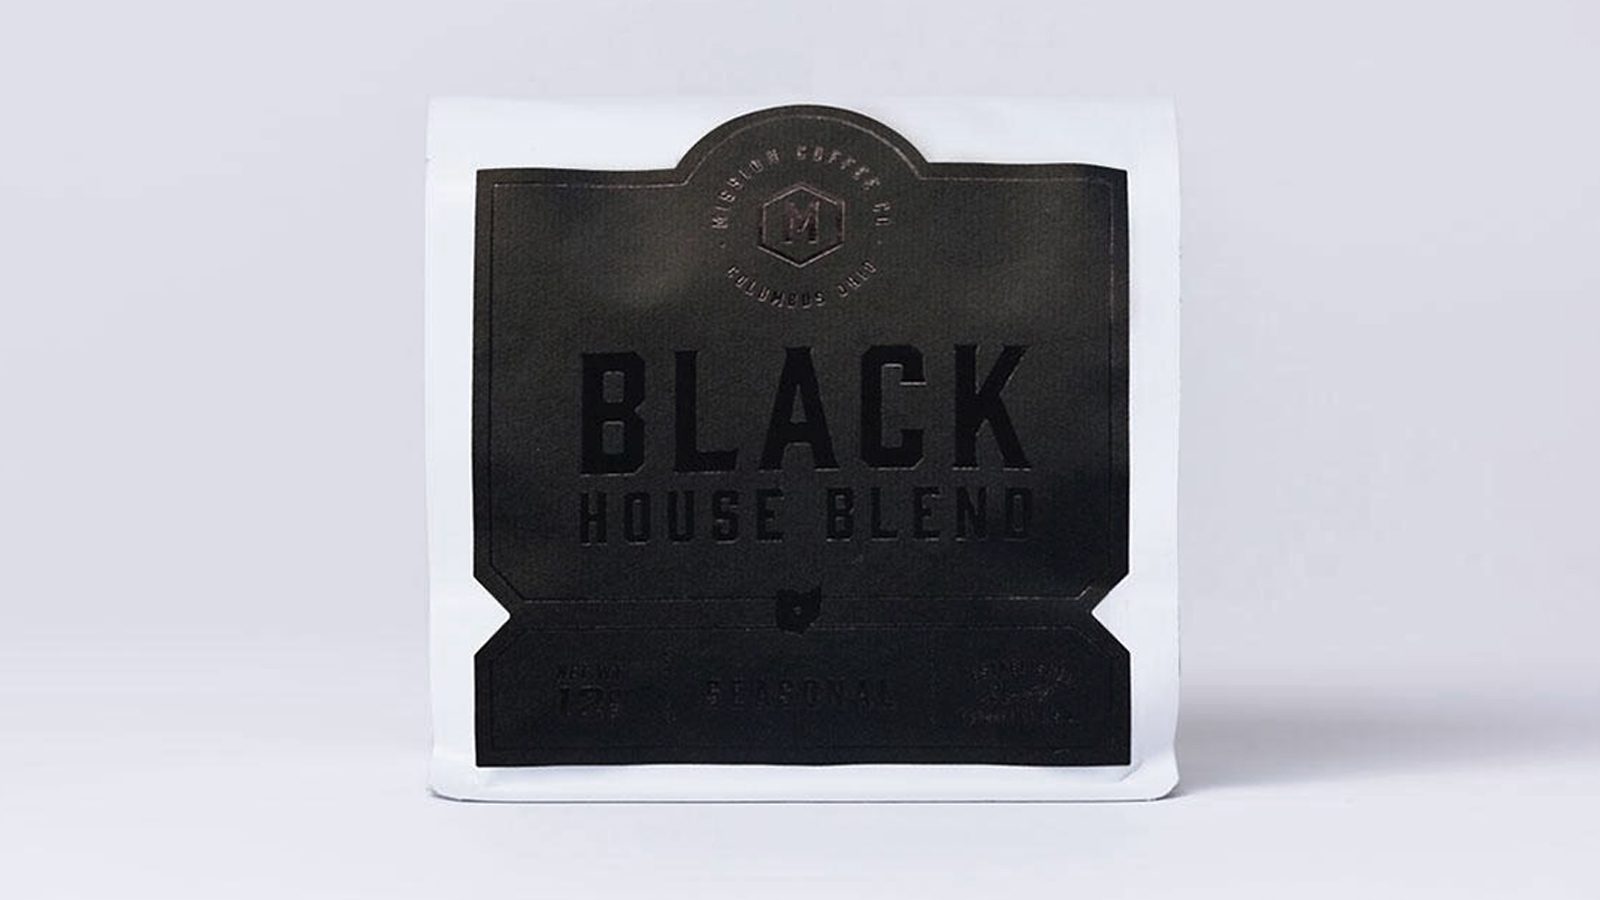 Mission Coffee Co. Black House Blend